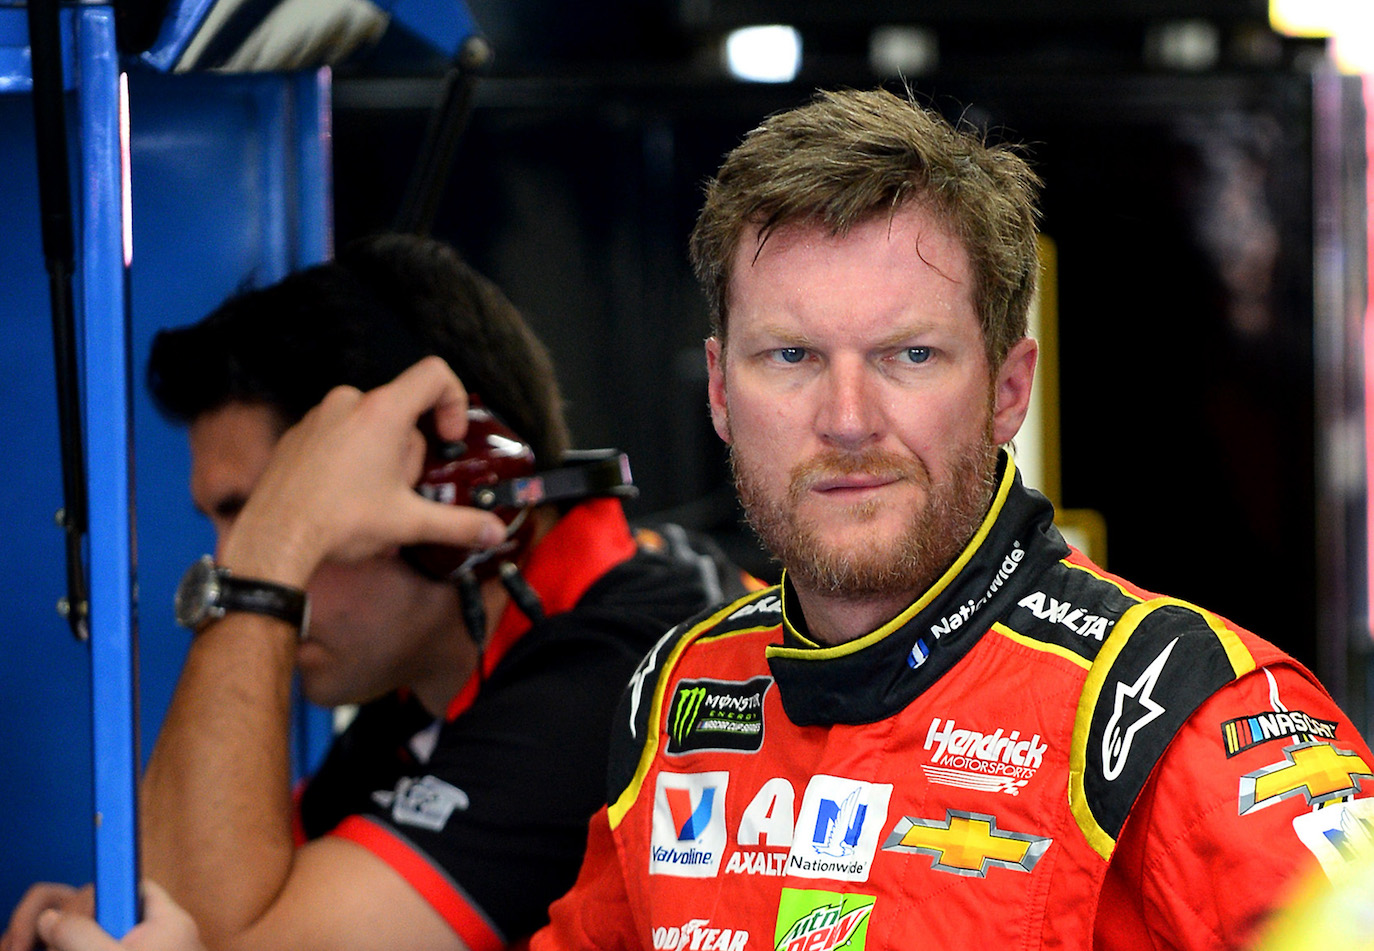 Dale Earnhardt Jr. Could Learn Some Anger Management Tips From Jeff Gordon